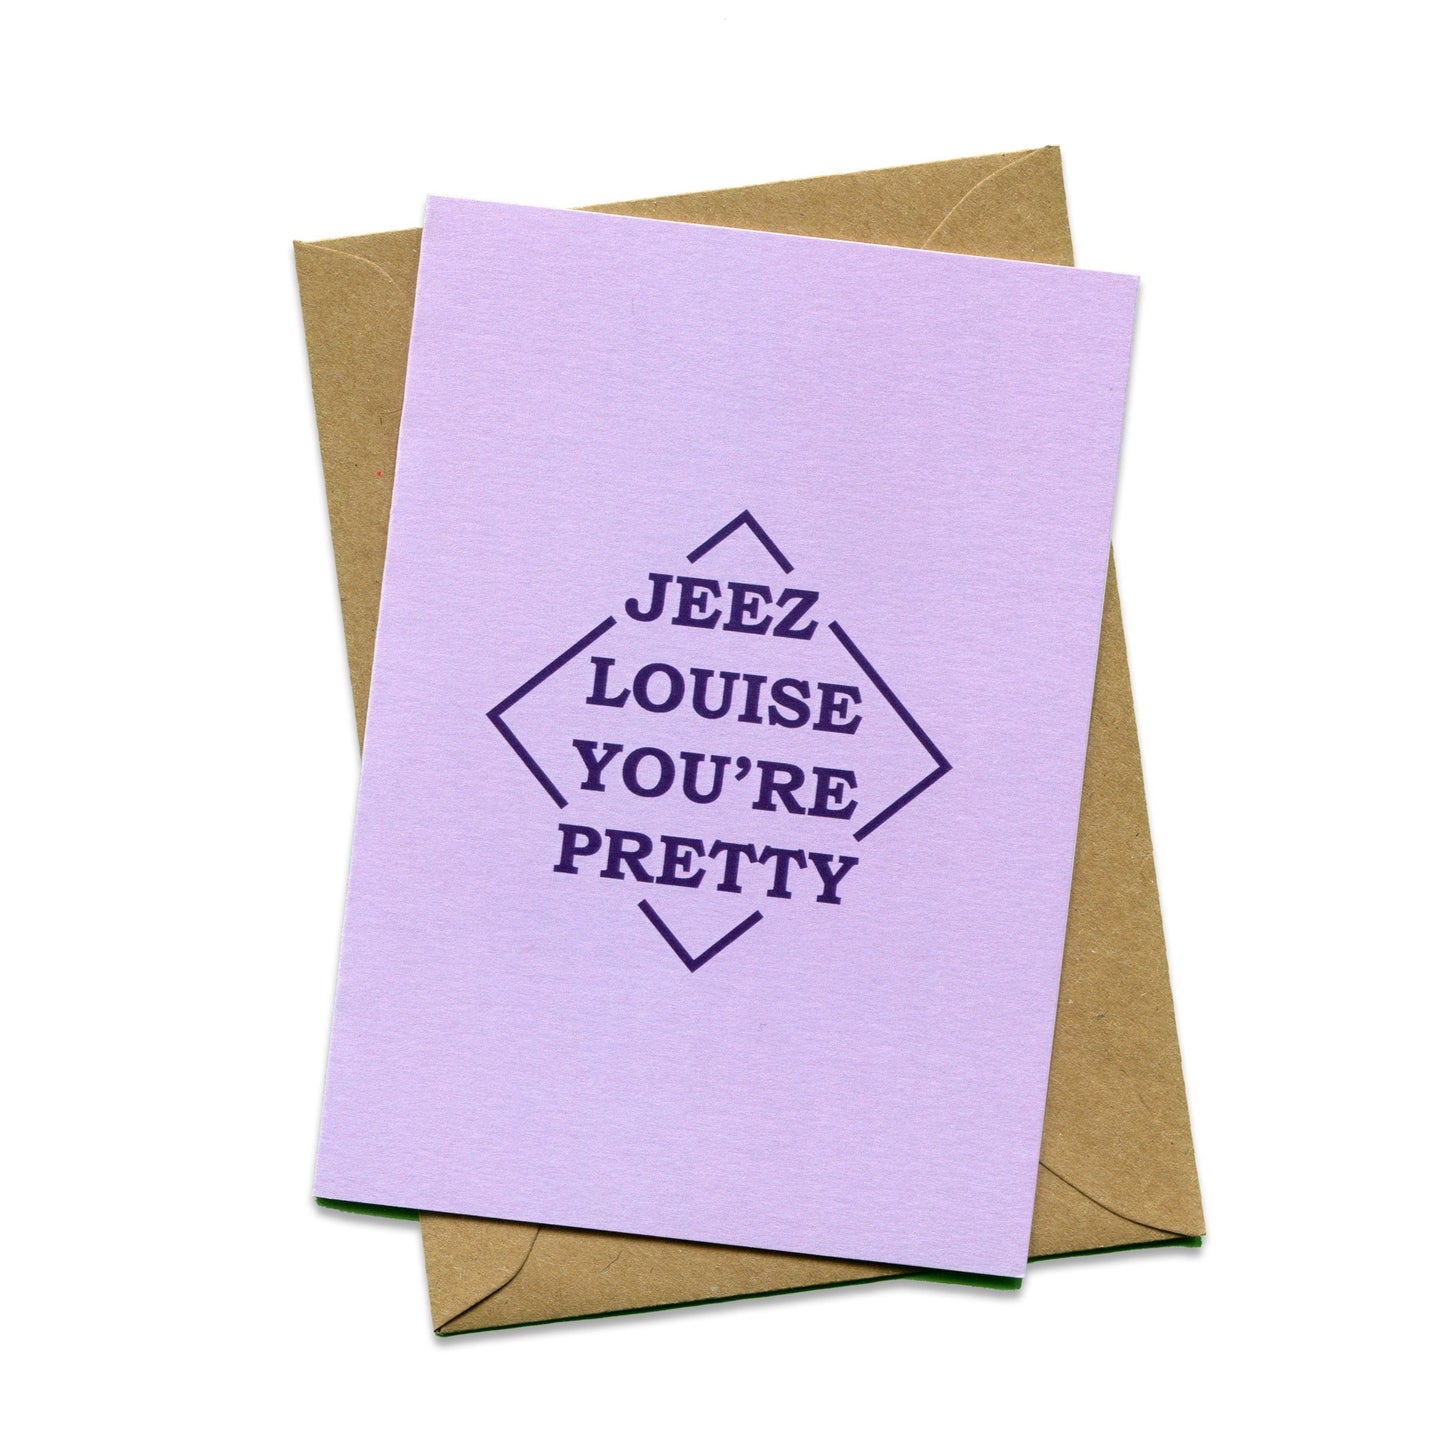 Things By Bean Jeez Louise You're Pretty Greeting Card